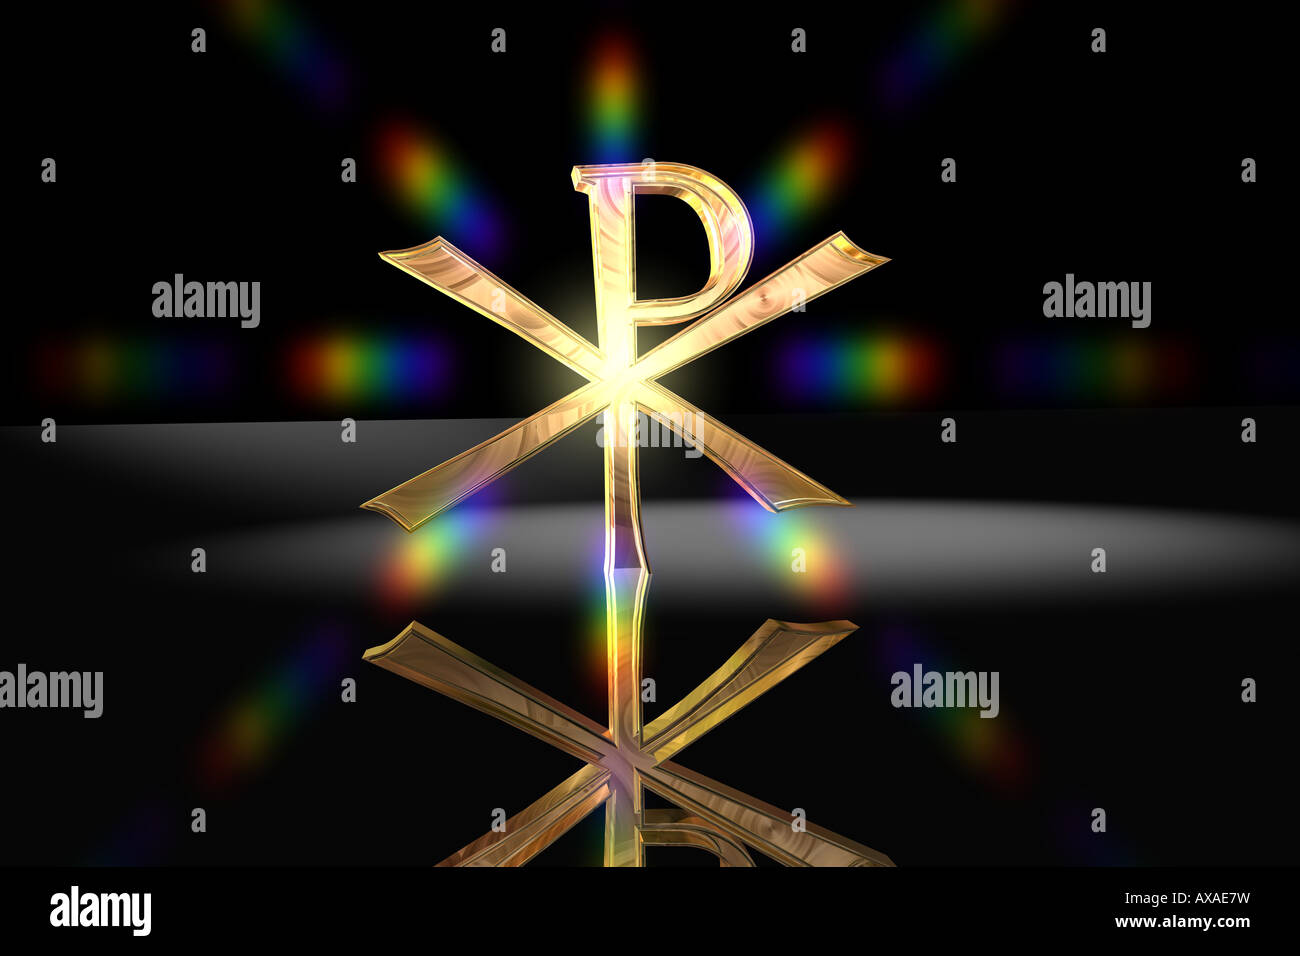 Golden Rendering of an Christian Pax Christi Sign with a rainbow-Lens Flare. Black Background. Stock Photo